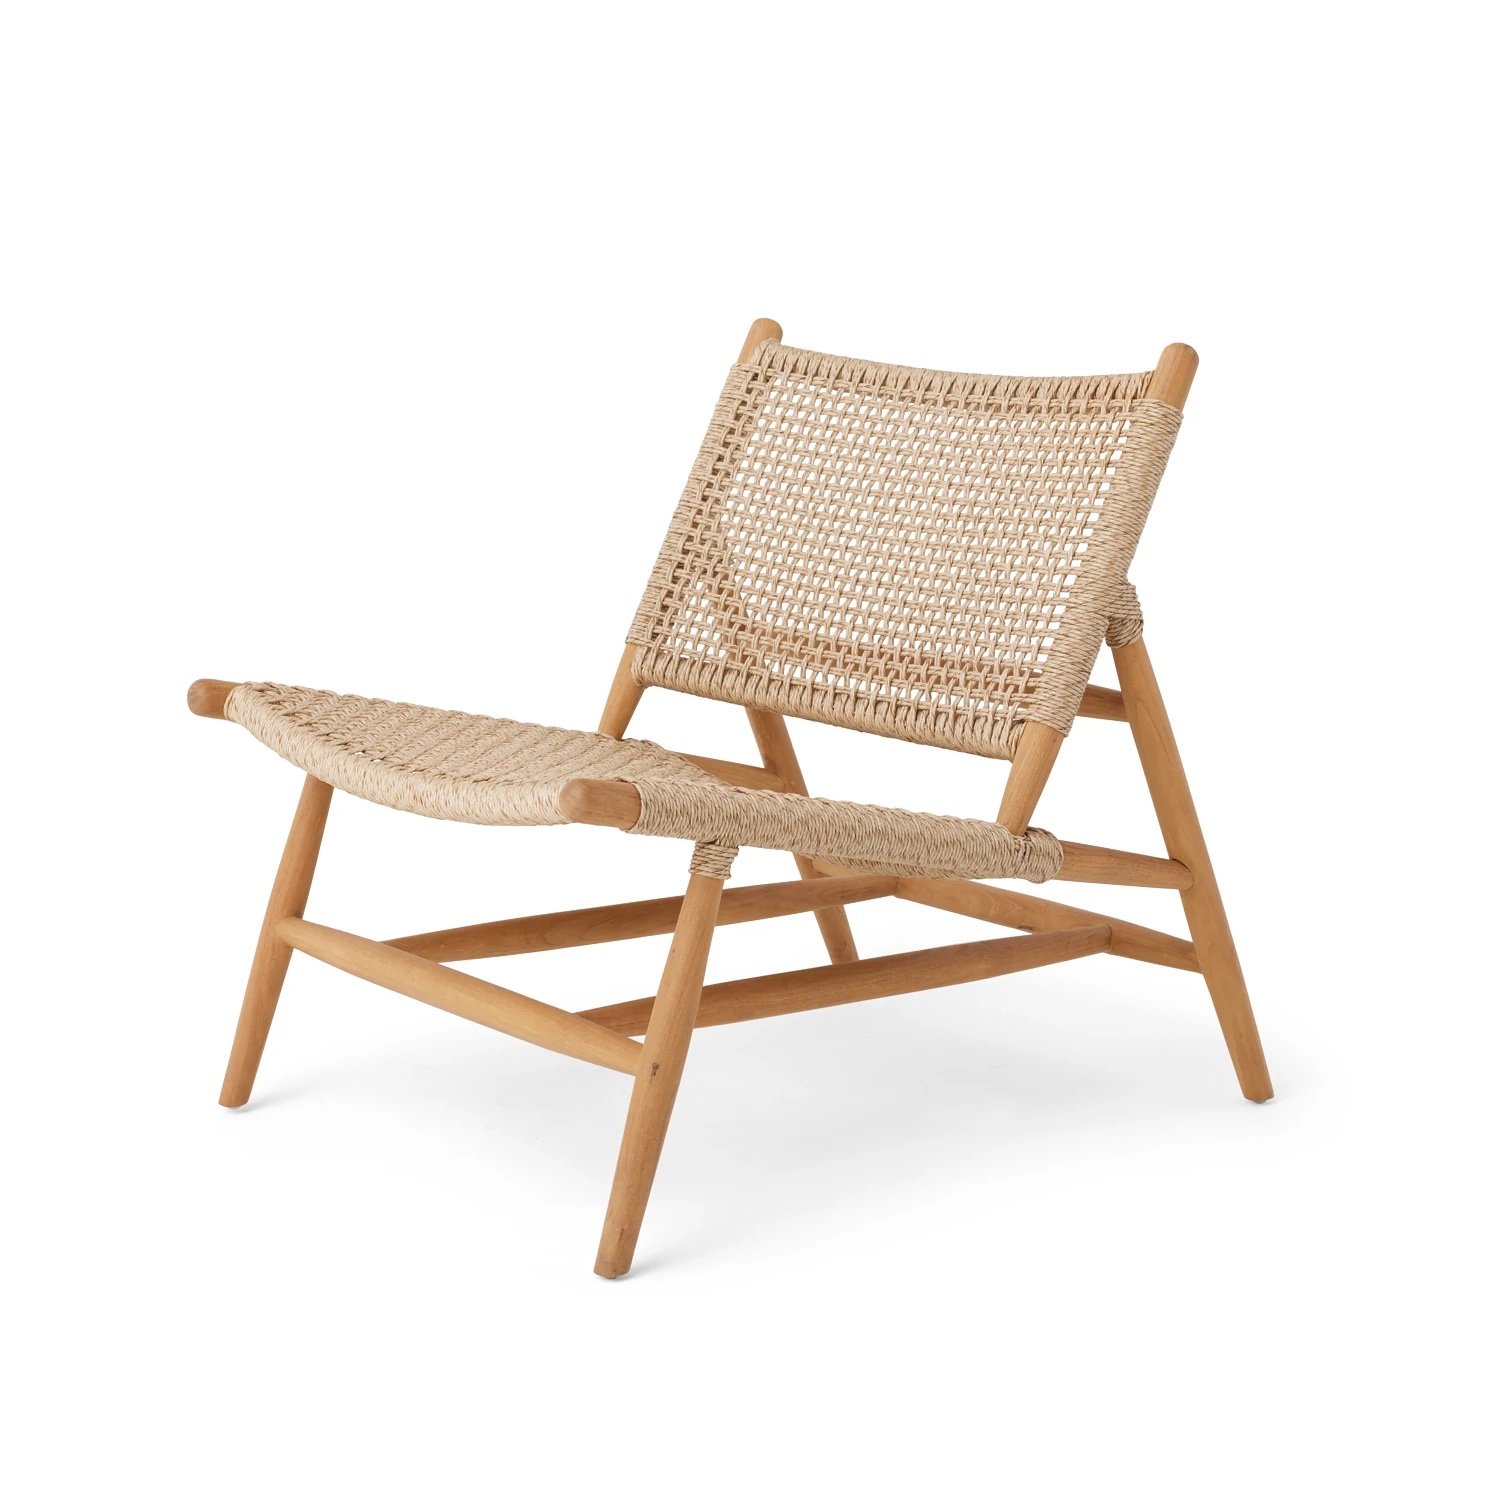 Rattan lounge chair with teak peg-style frame and legs.